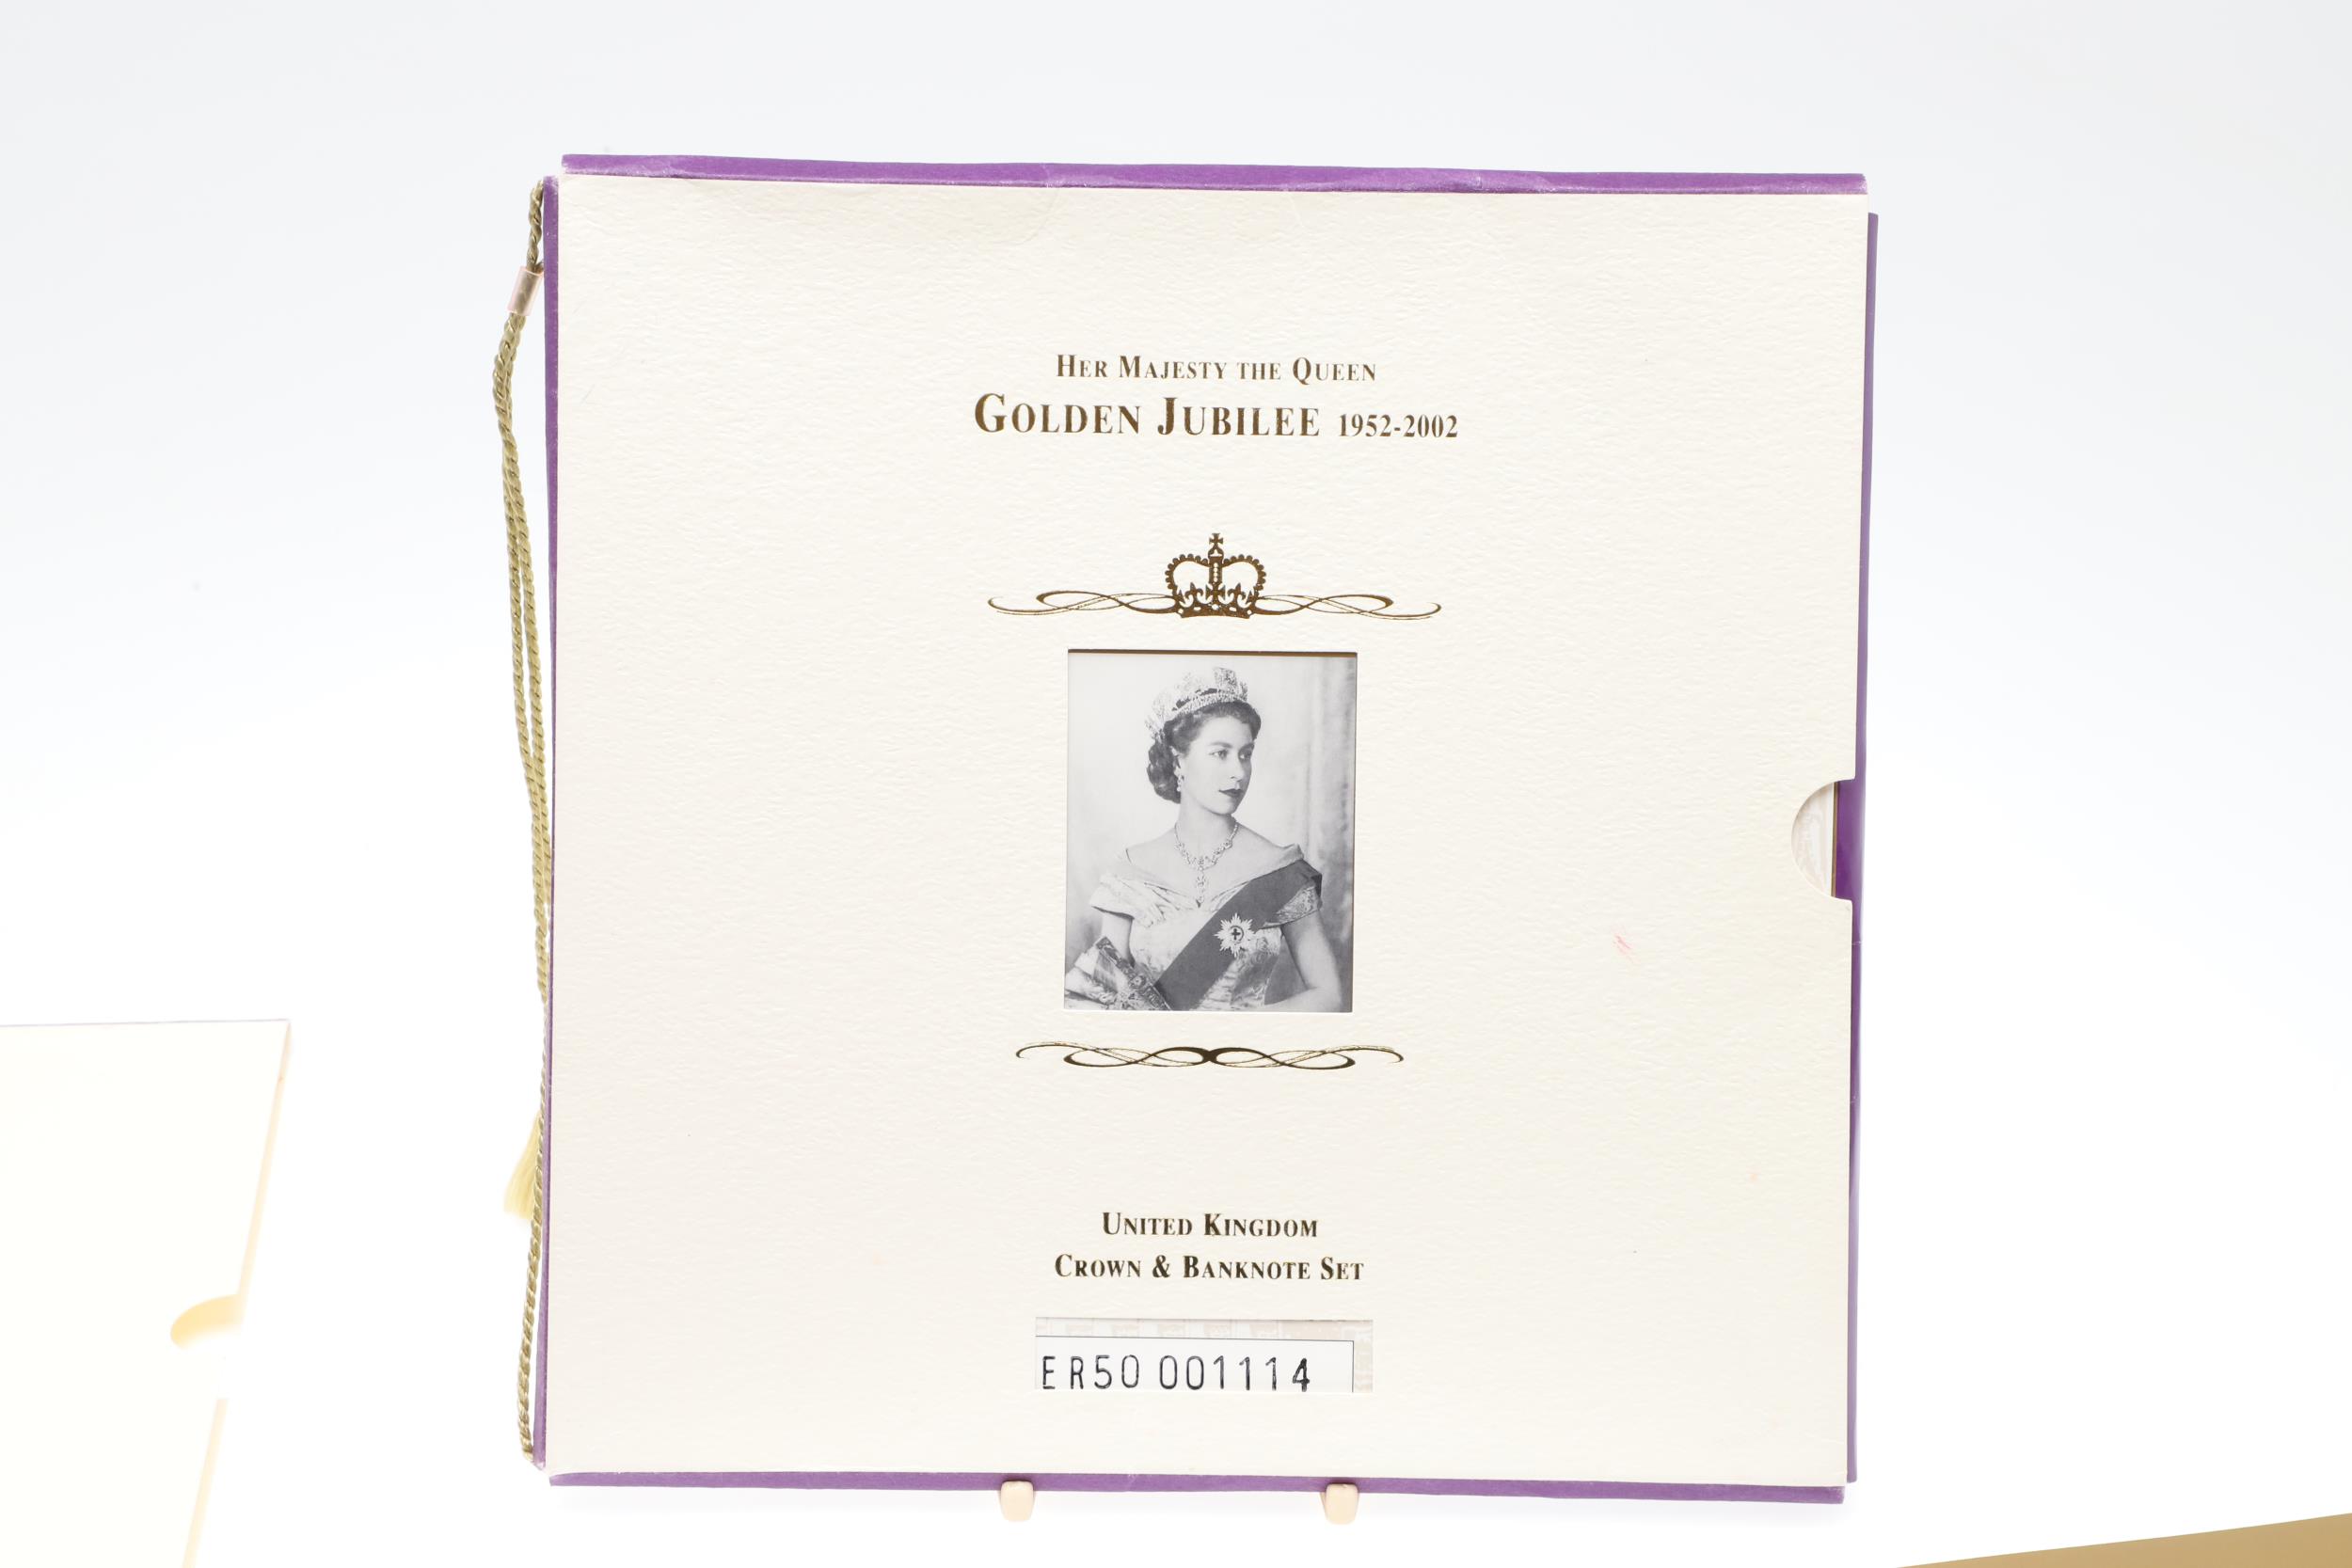 TWO CONSECUTIVE GOLDEN JUBILEE PRESENTATION ROYAL MINT COIN AND NOTE SETS. - Image 2 of 9